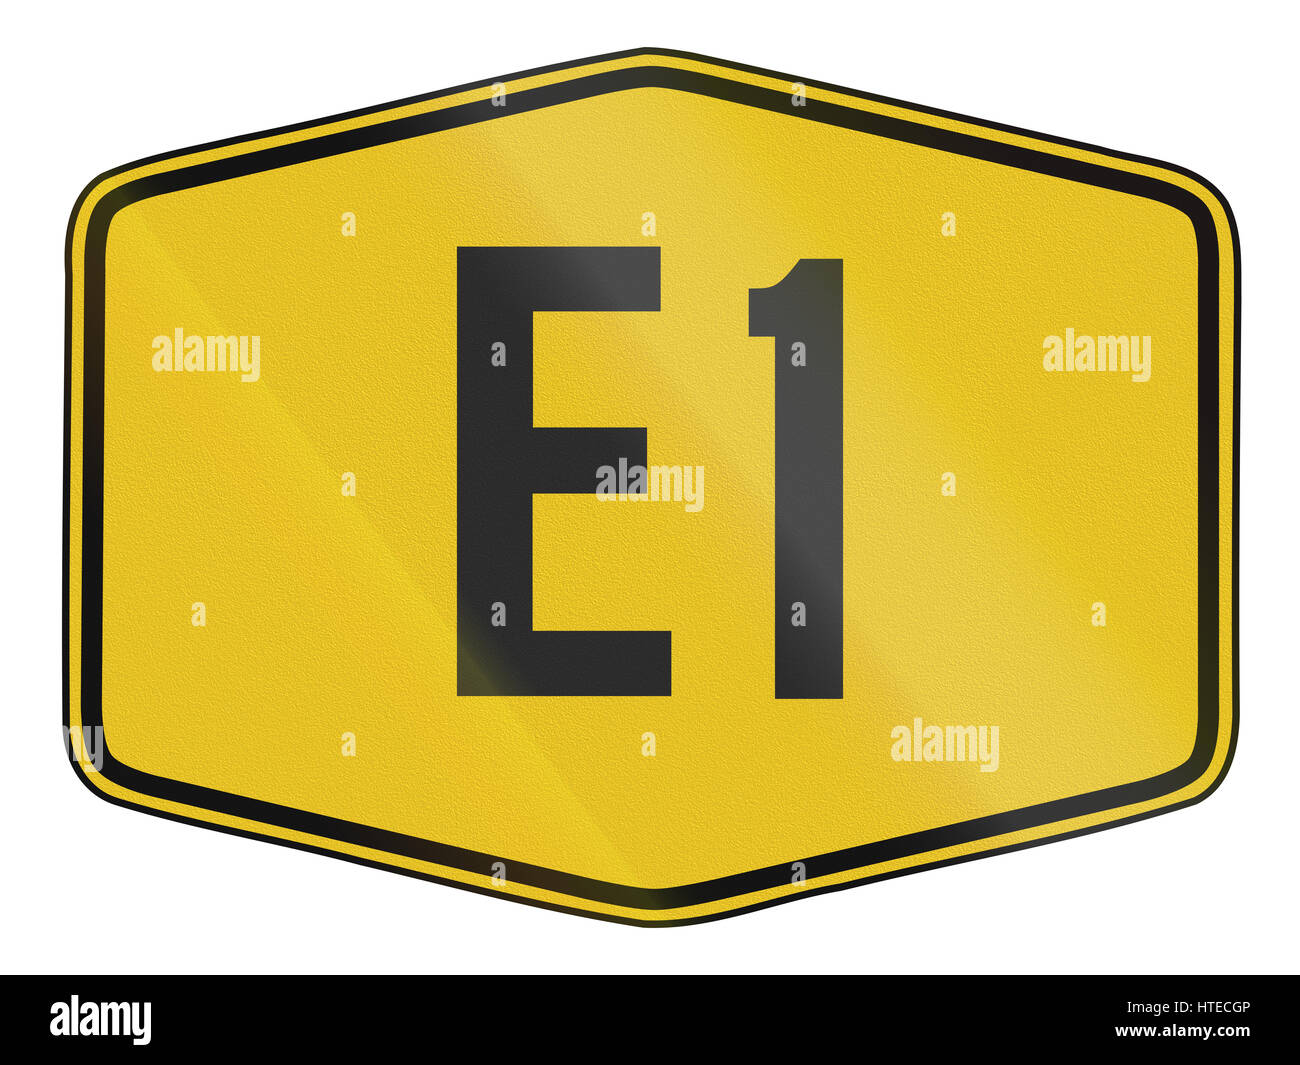 Highway shield for Malaysian Federal Route E1. Stock Photo